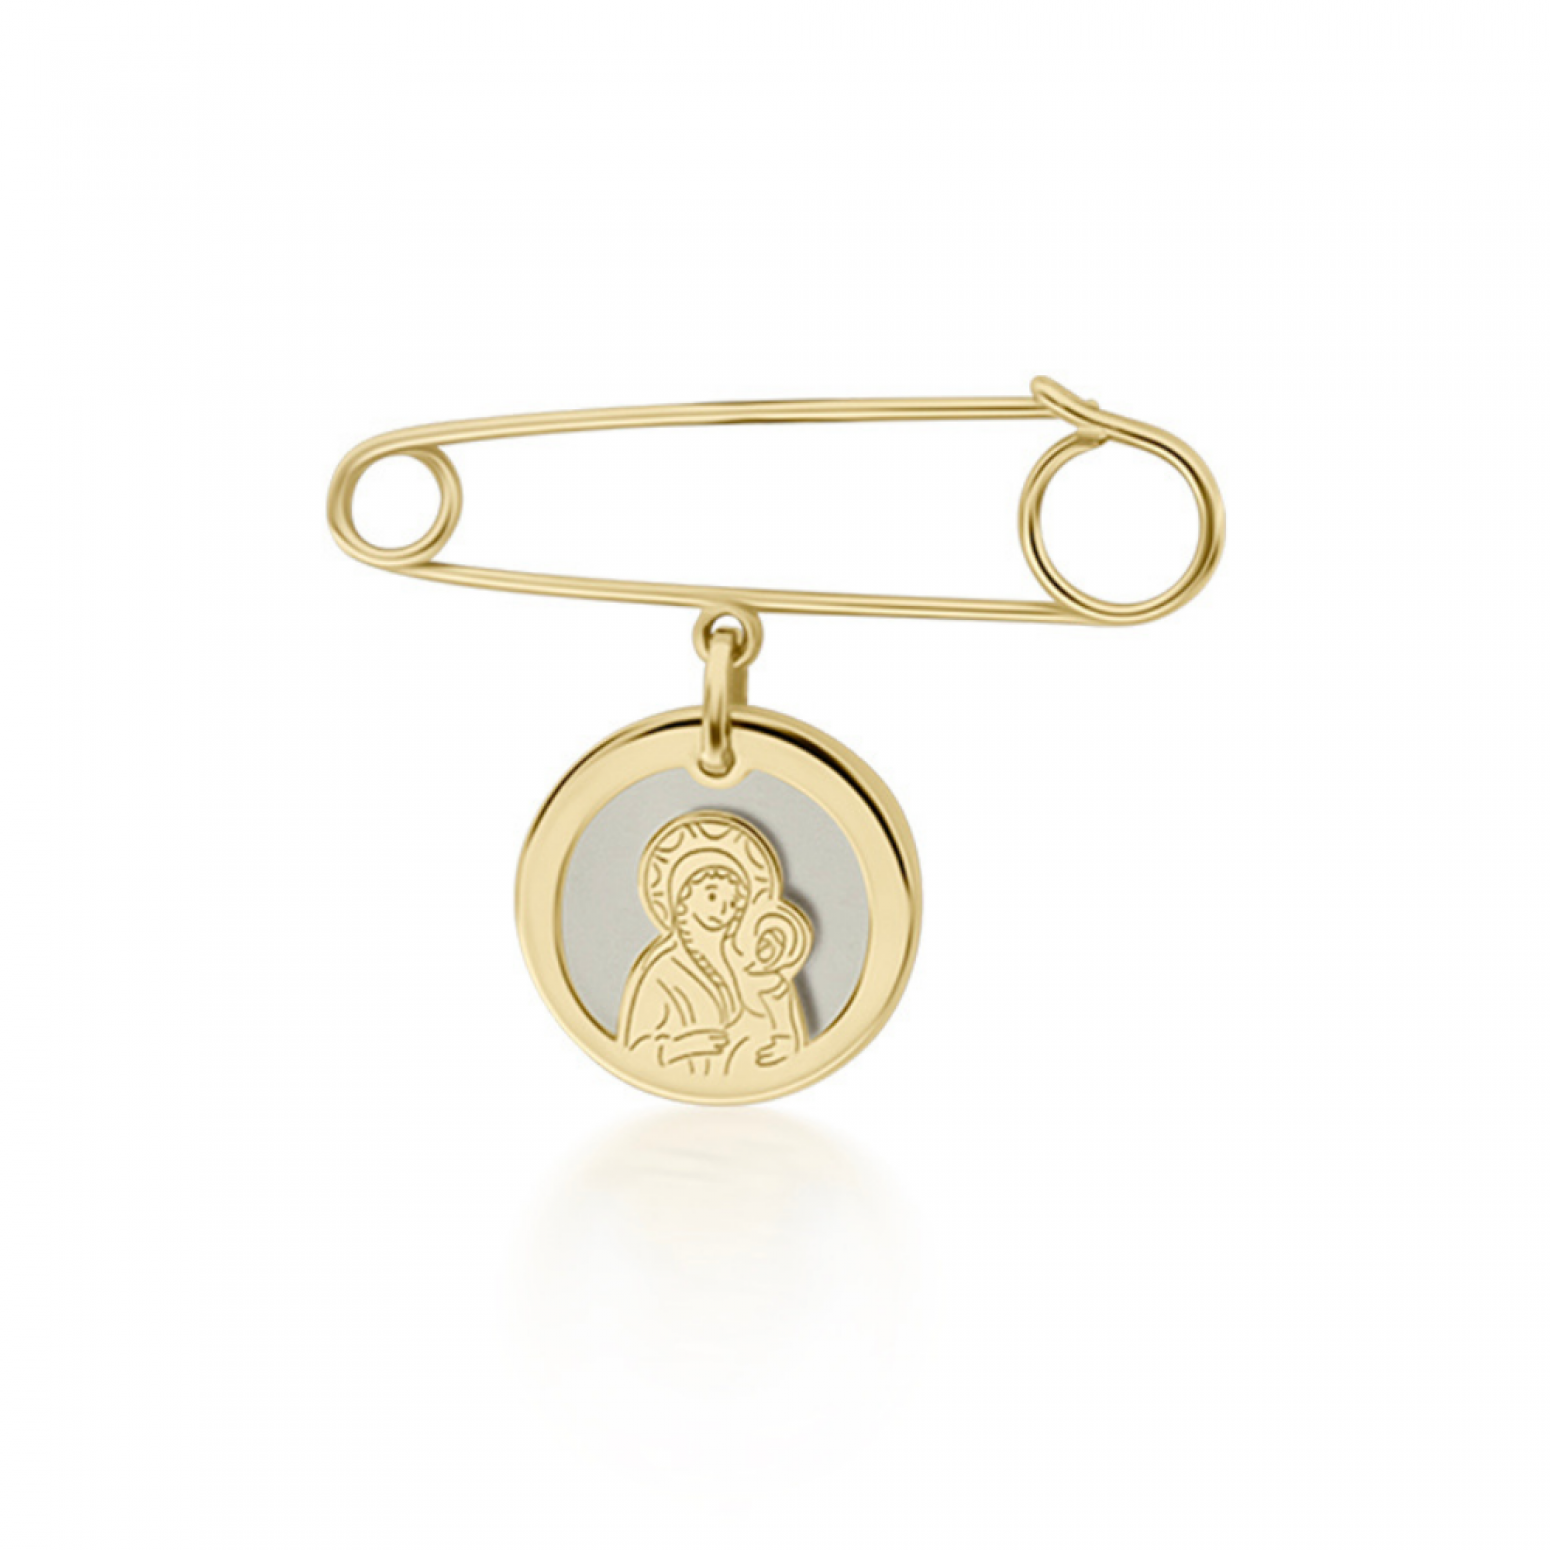 Babies pin K14 gold with Holy Mary and mother of pearl pf0130 BABIES Κοσμηματα - chrilia.gr